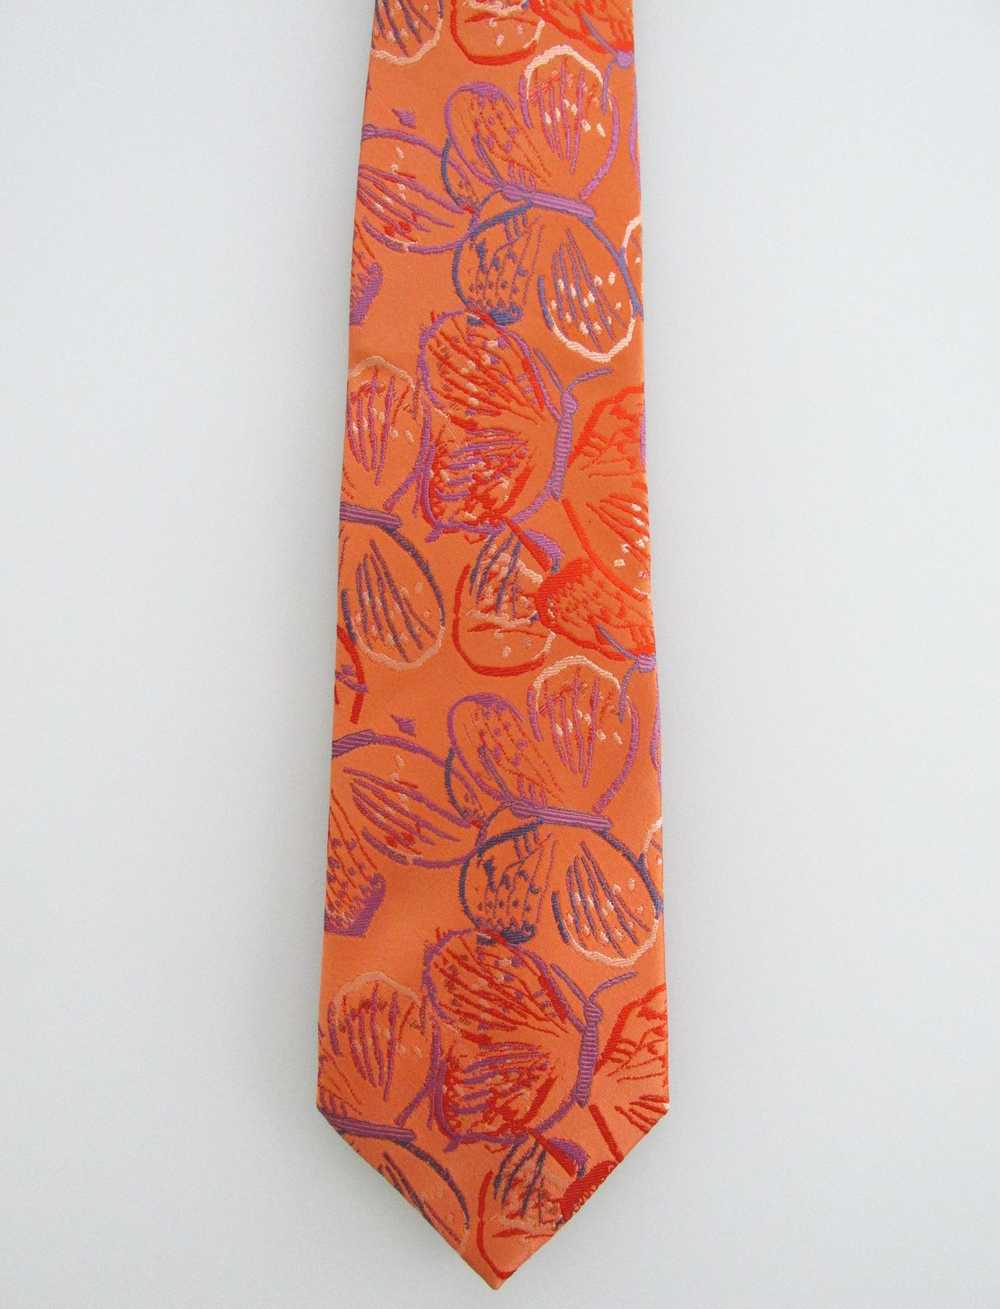 Other The Nature Conservancy Men's Silk Tie - image 2